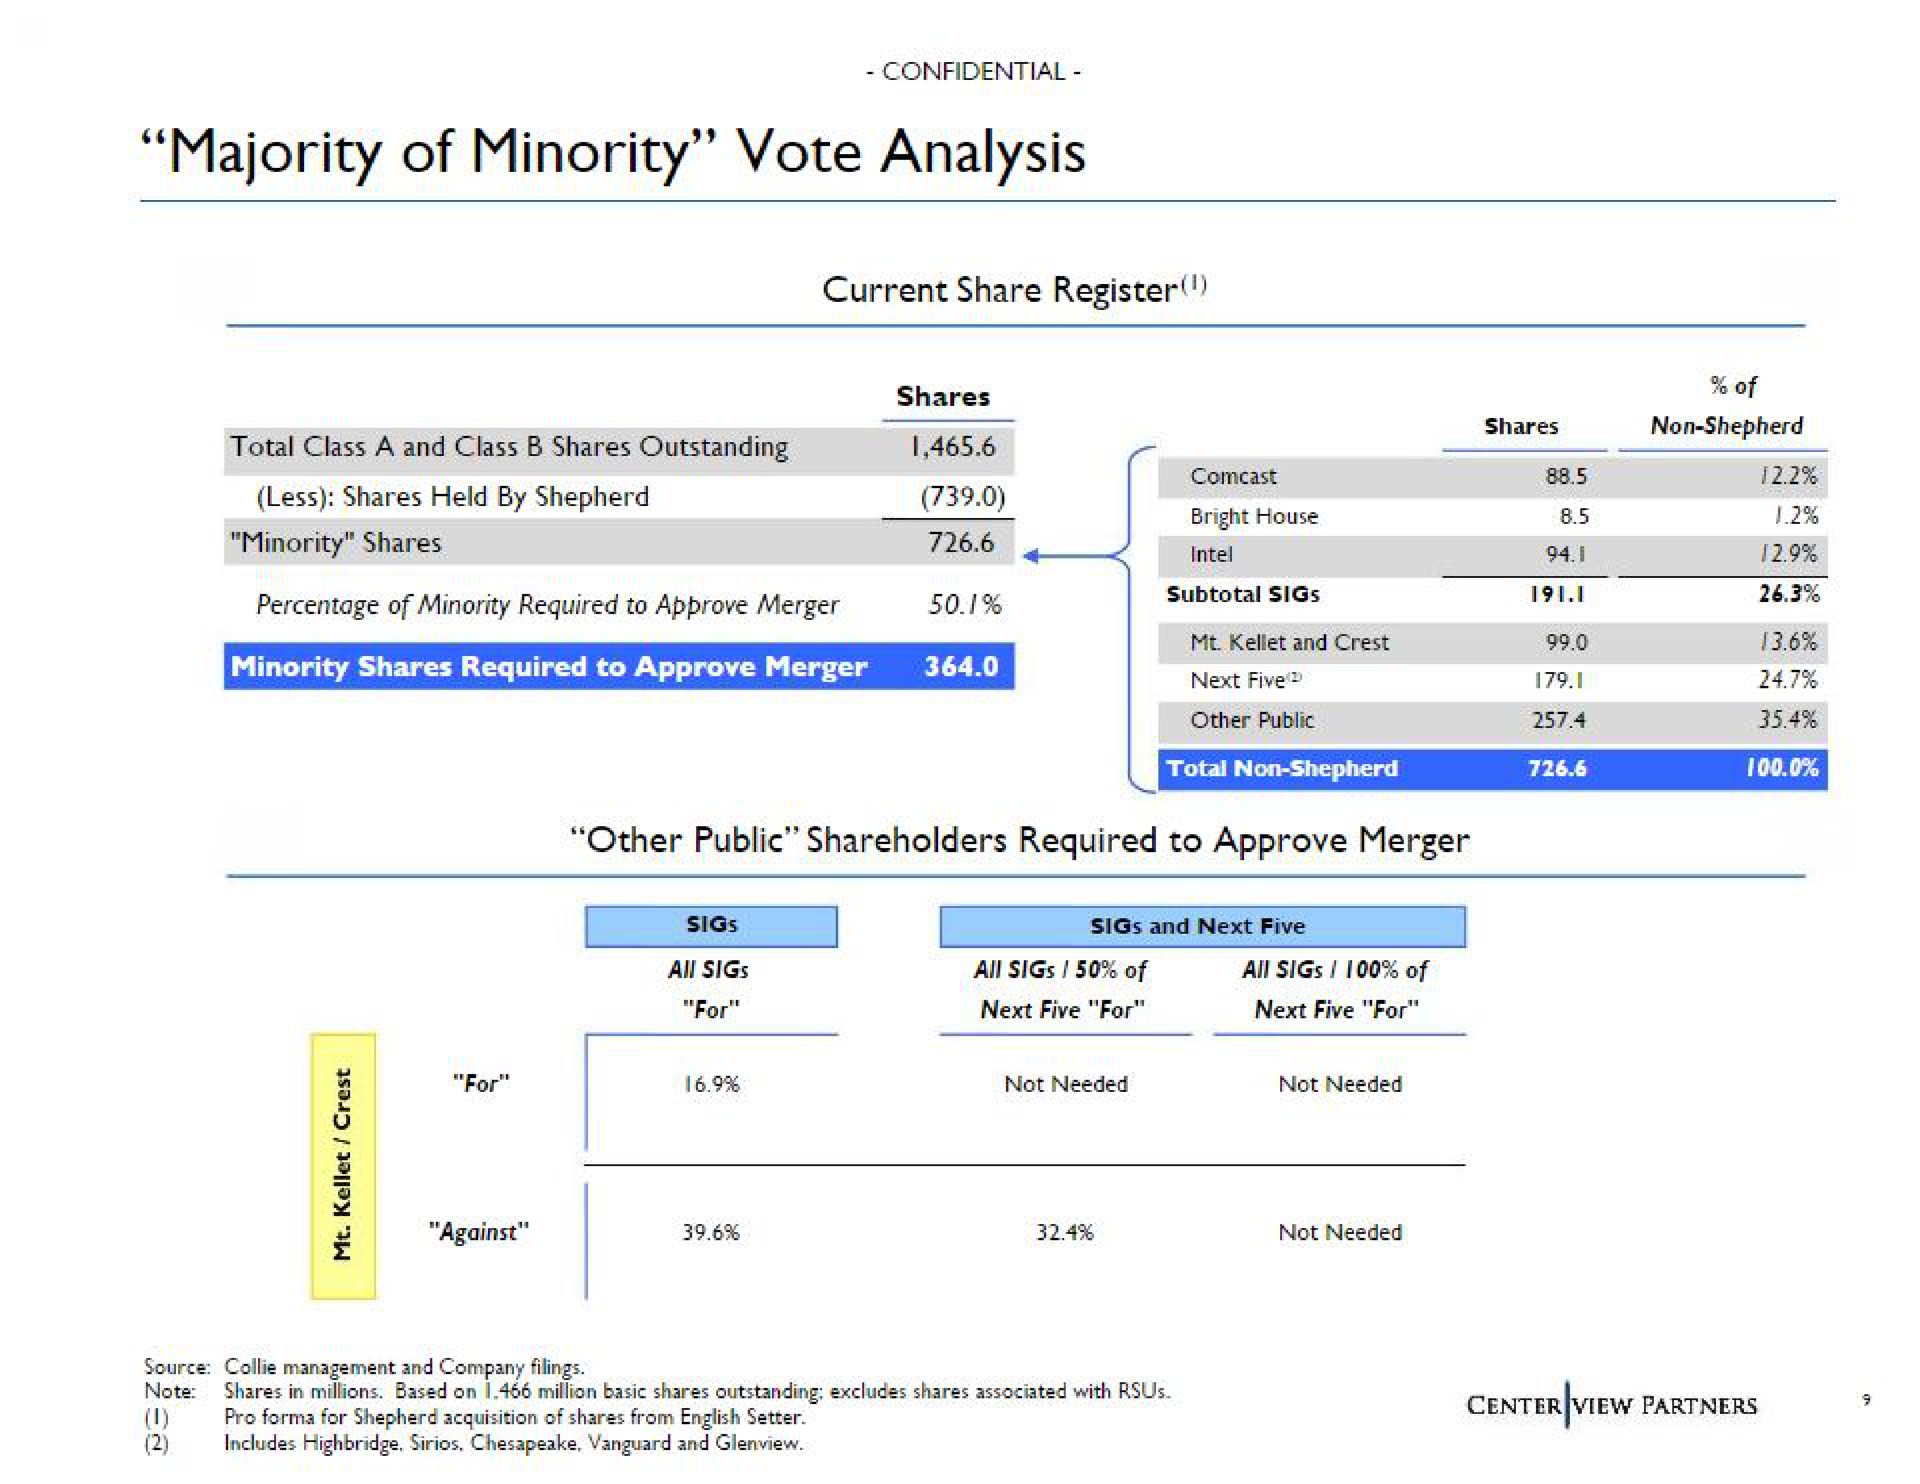 majority of minority vote analysis less shares held by shepherd setts | Centerview Partners